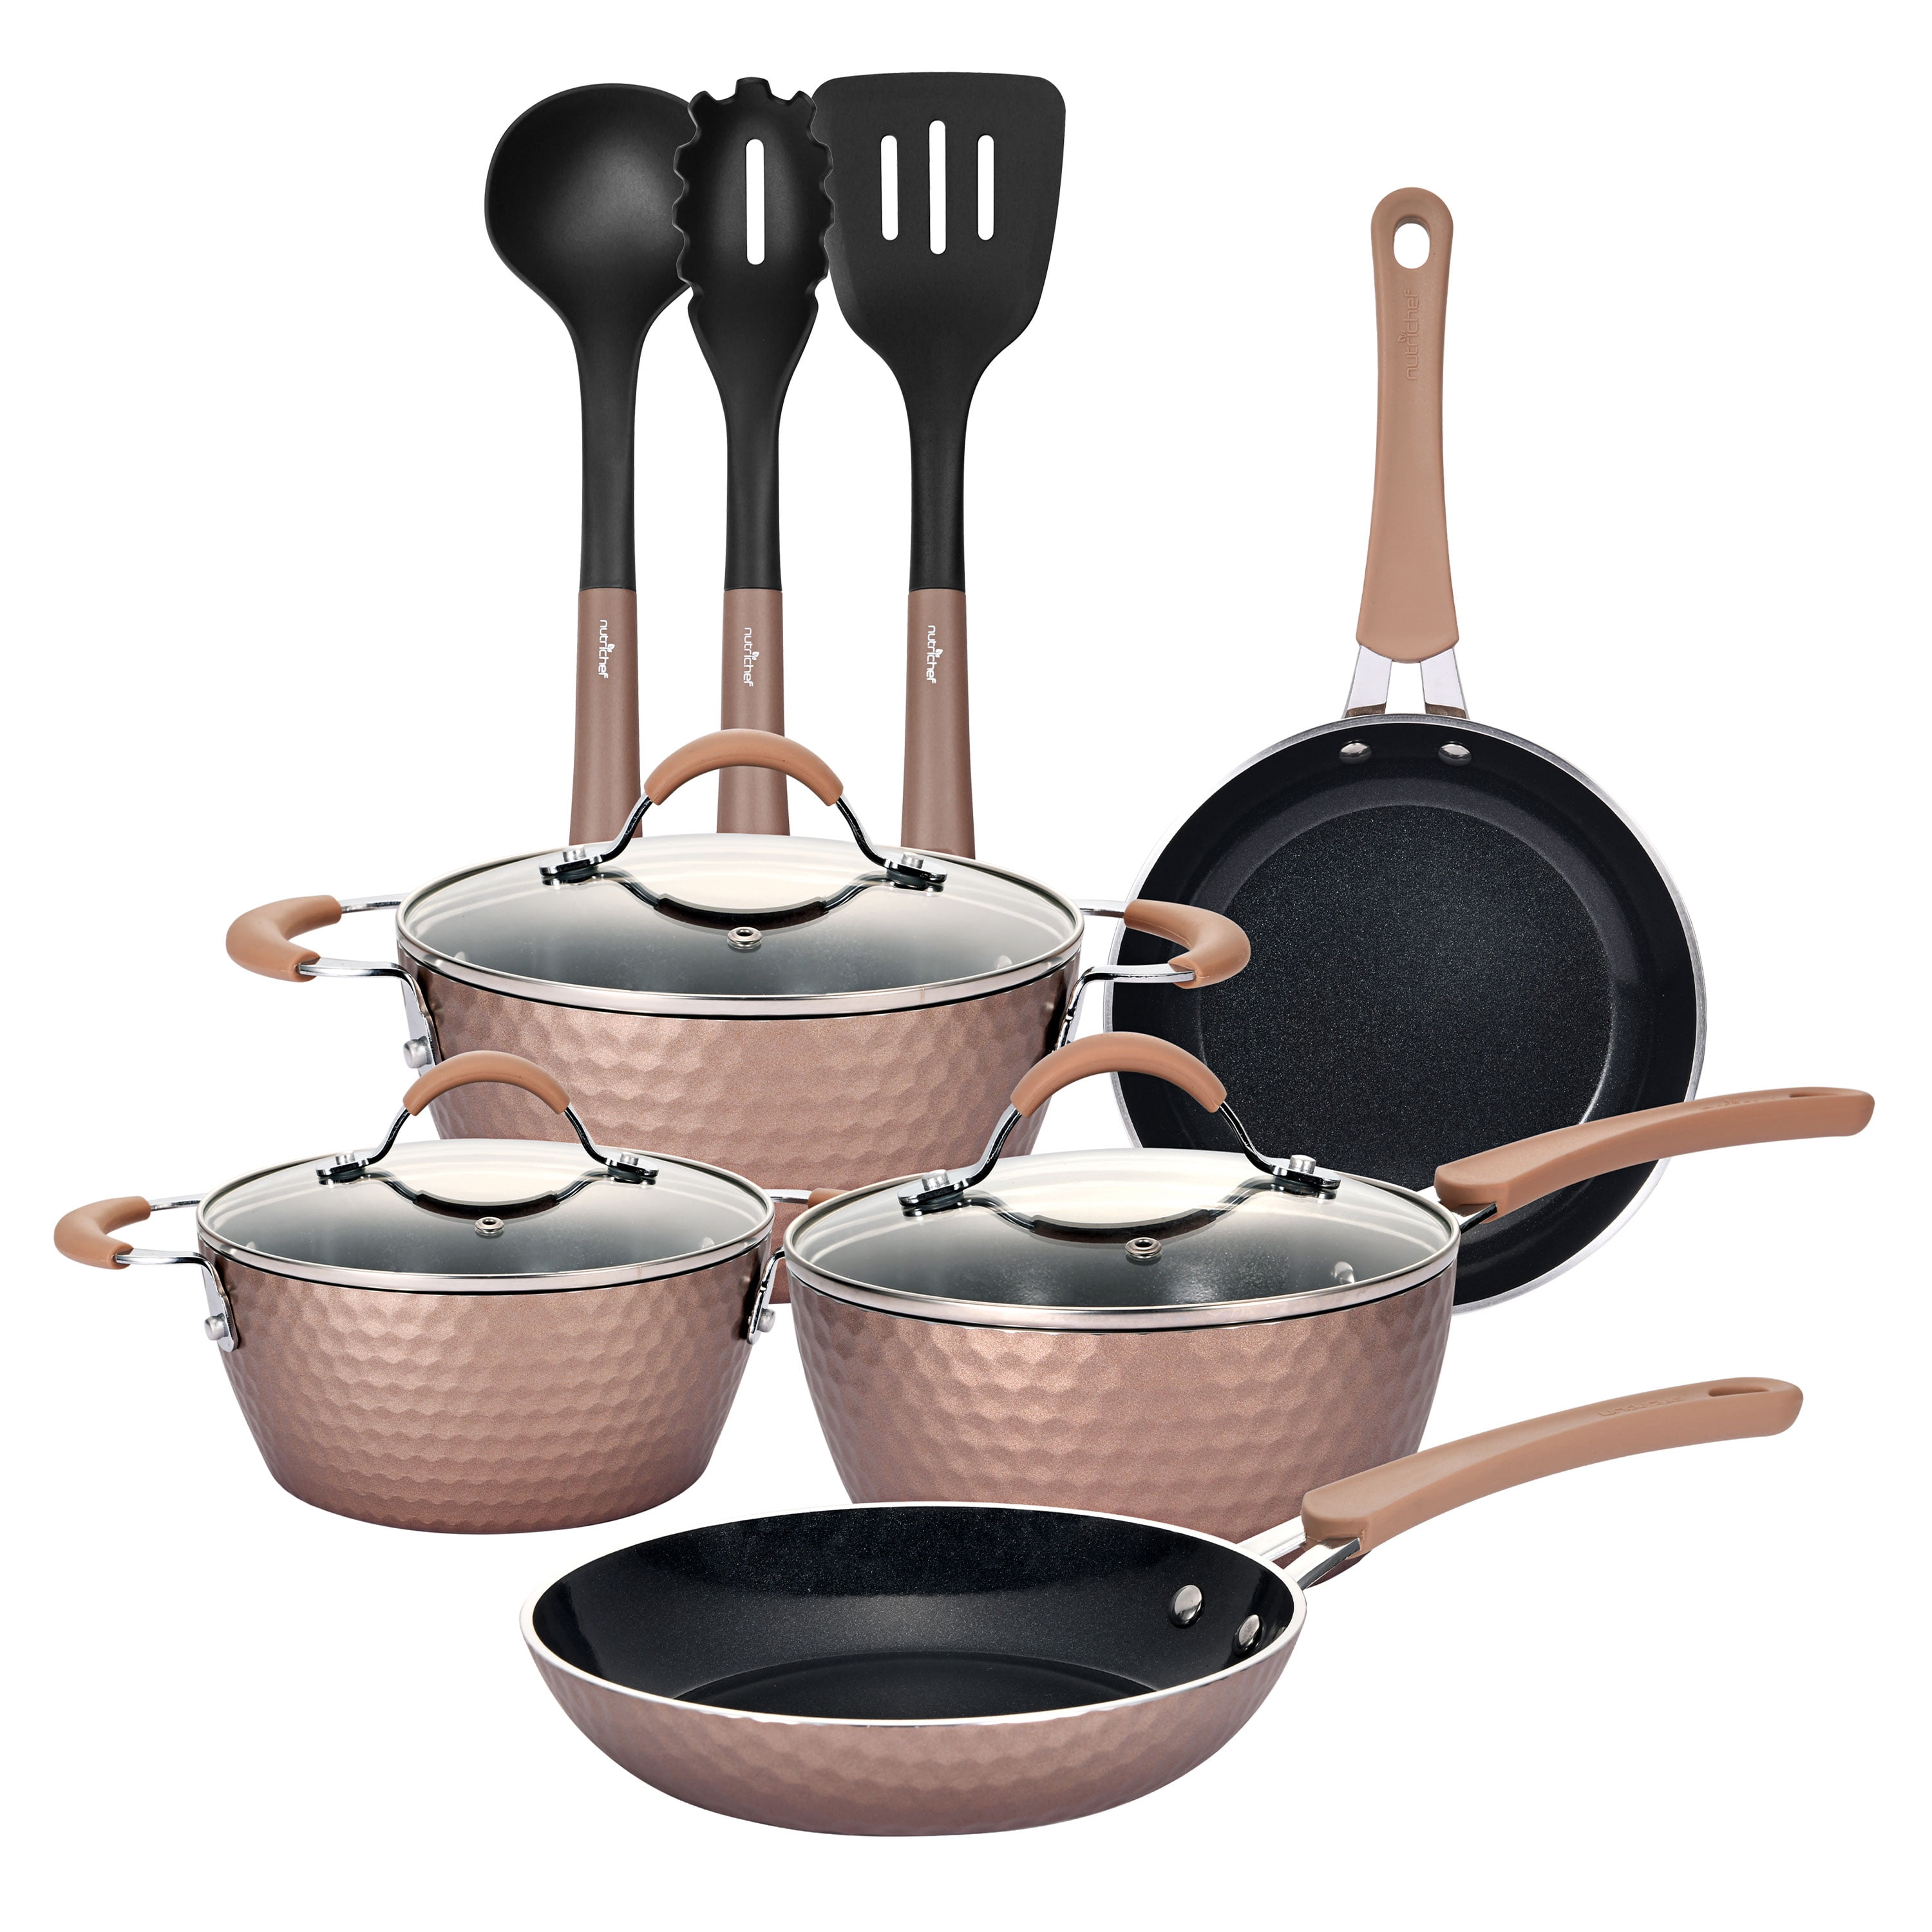 Nutrichef 17 Piece Non-Stick Cookware Set, Pots & Pans with Foldable Knob, Space Saving, Stackable, Nylon Tools Set, Induction Base, Gray